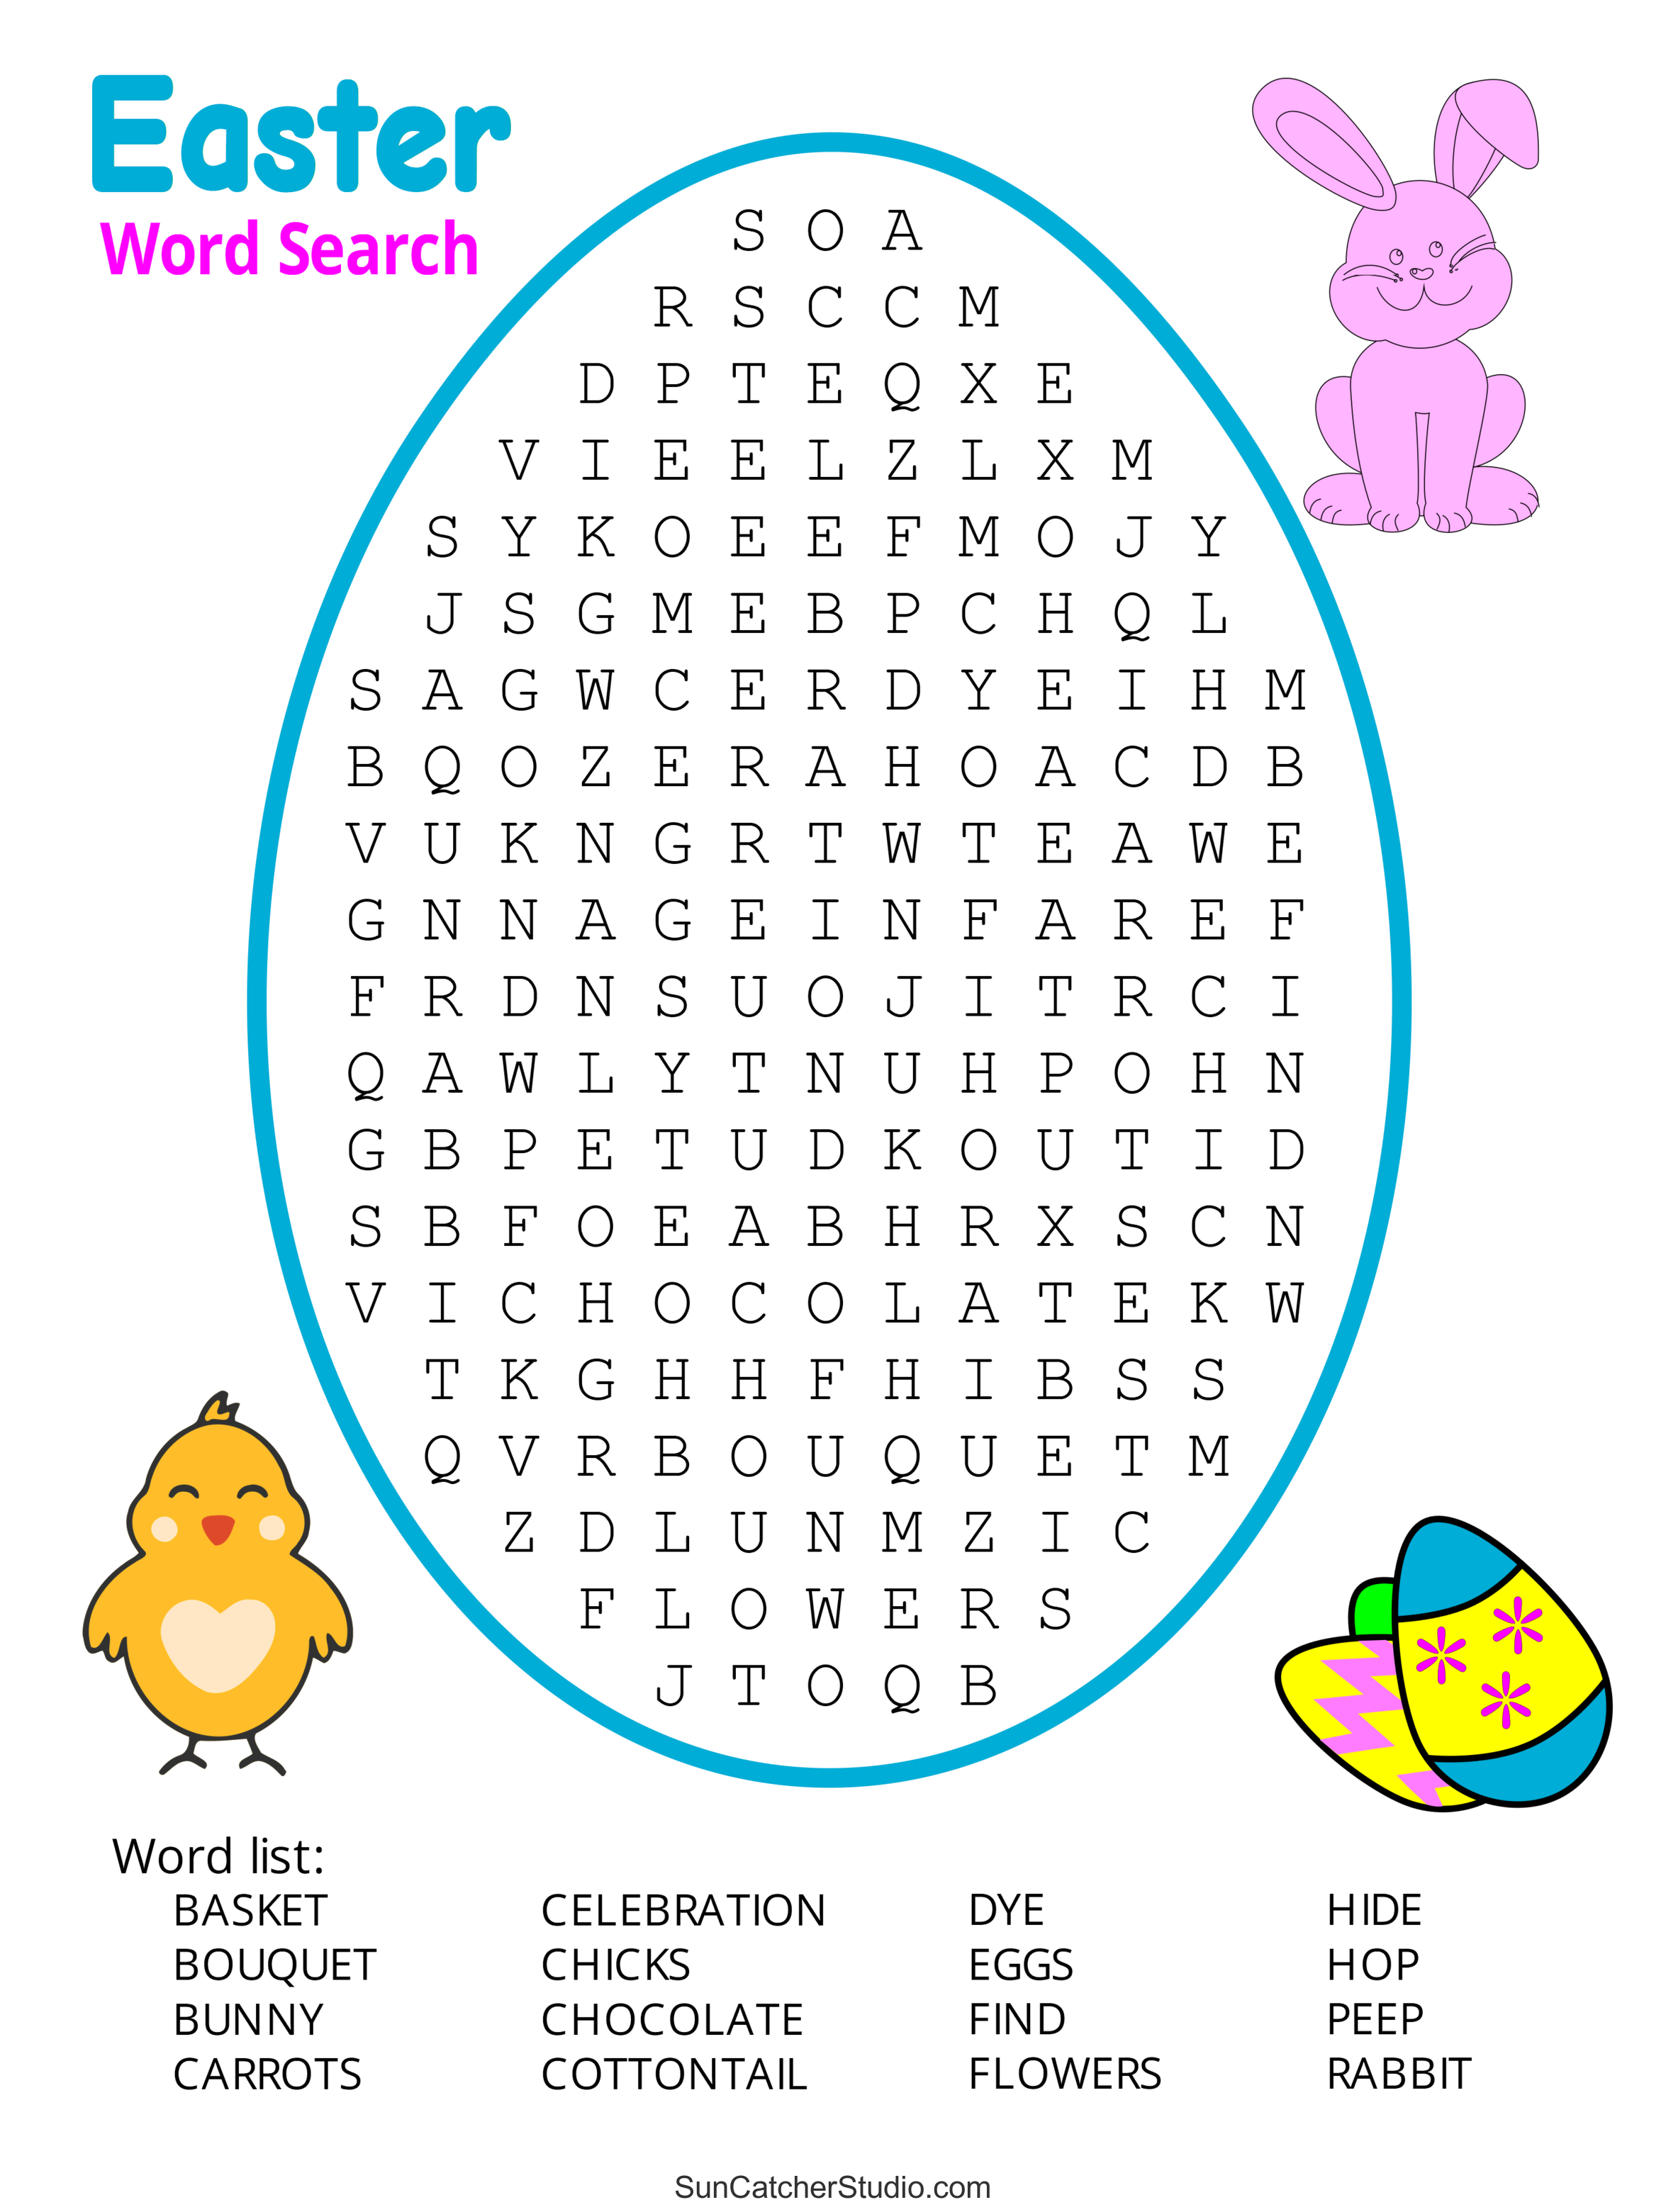 Easter Word Search Free Printable PDF Puzzles DIY Projects Patterns Monograms Designs